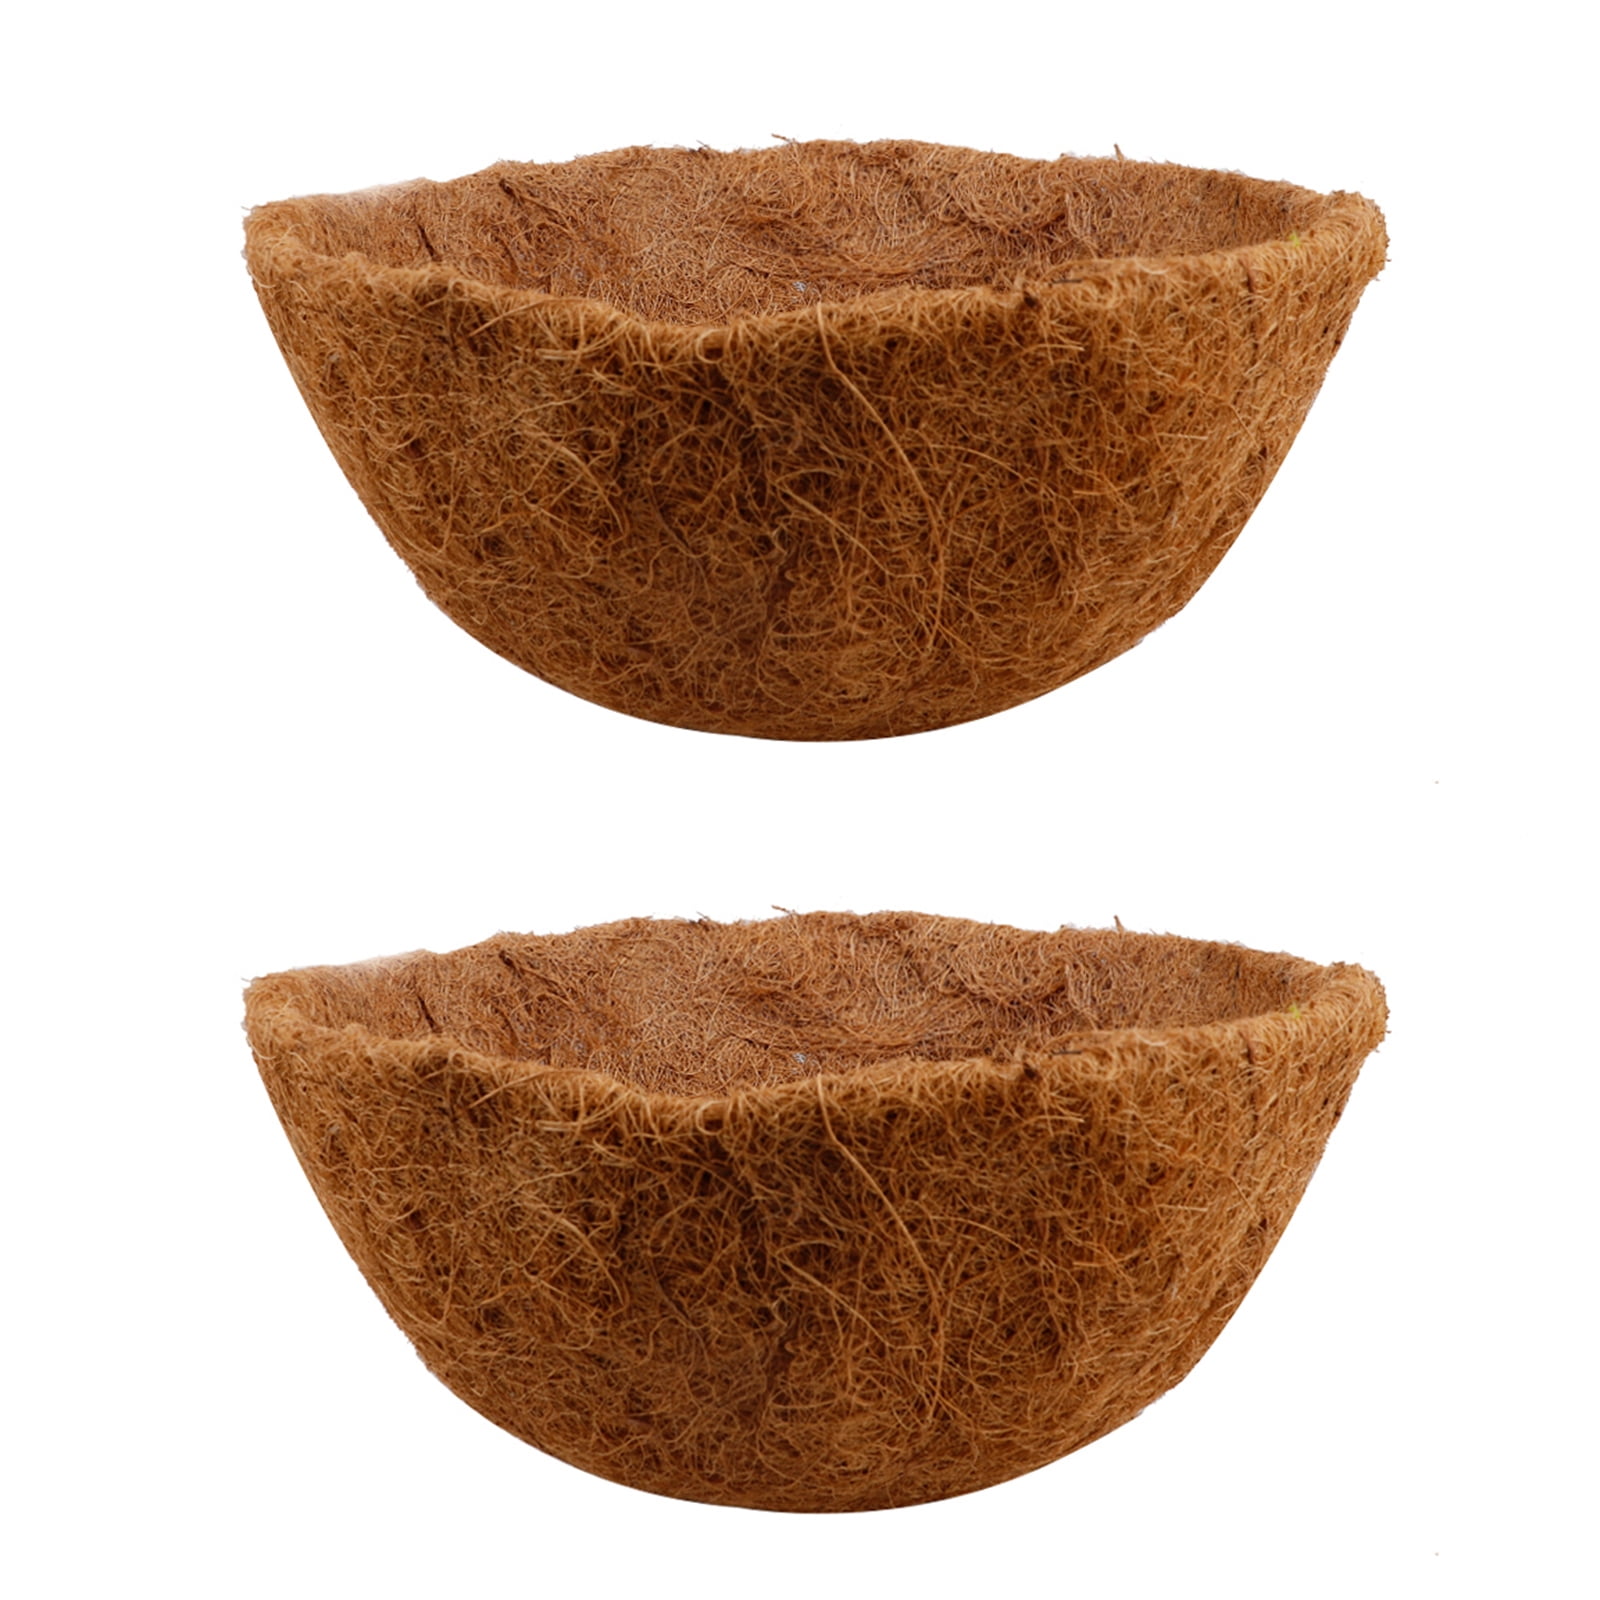 COSYLAND 2PCS 12 inch Round Coco Liners for Hanging Basket Coconut Fiber Planter Inserts Replacement Liner for Garden Flower Pot 